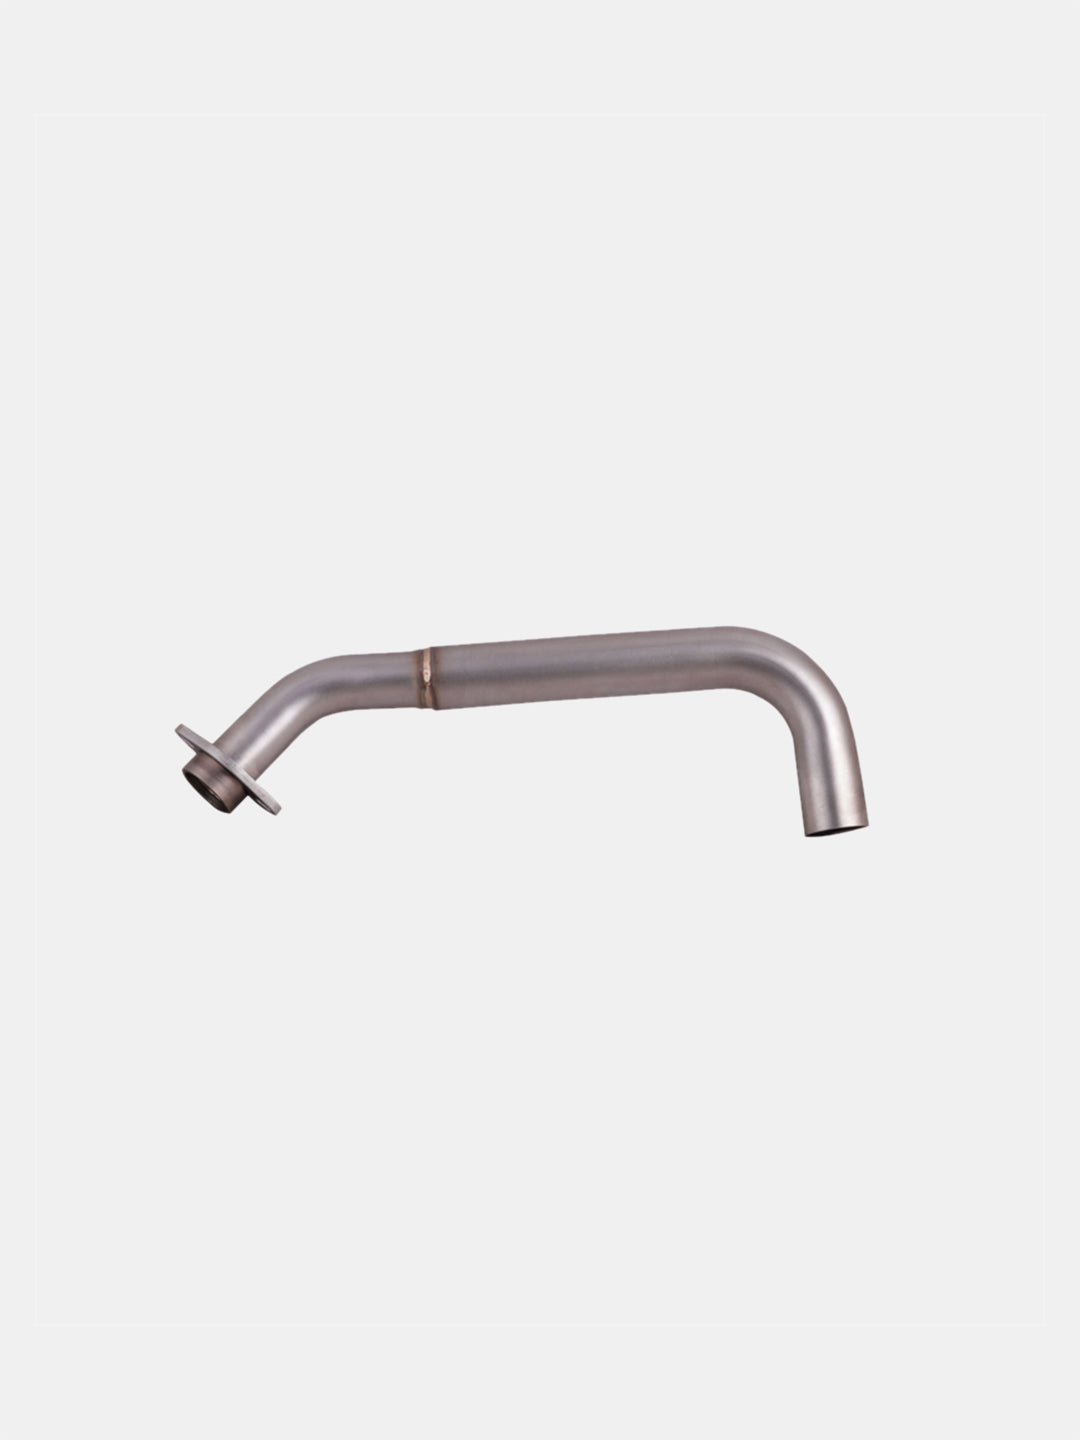 Exhaust Bend Pipe for Kawasaki Z900